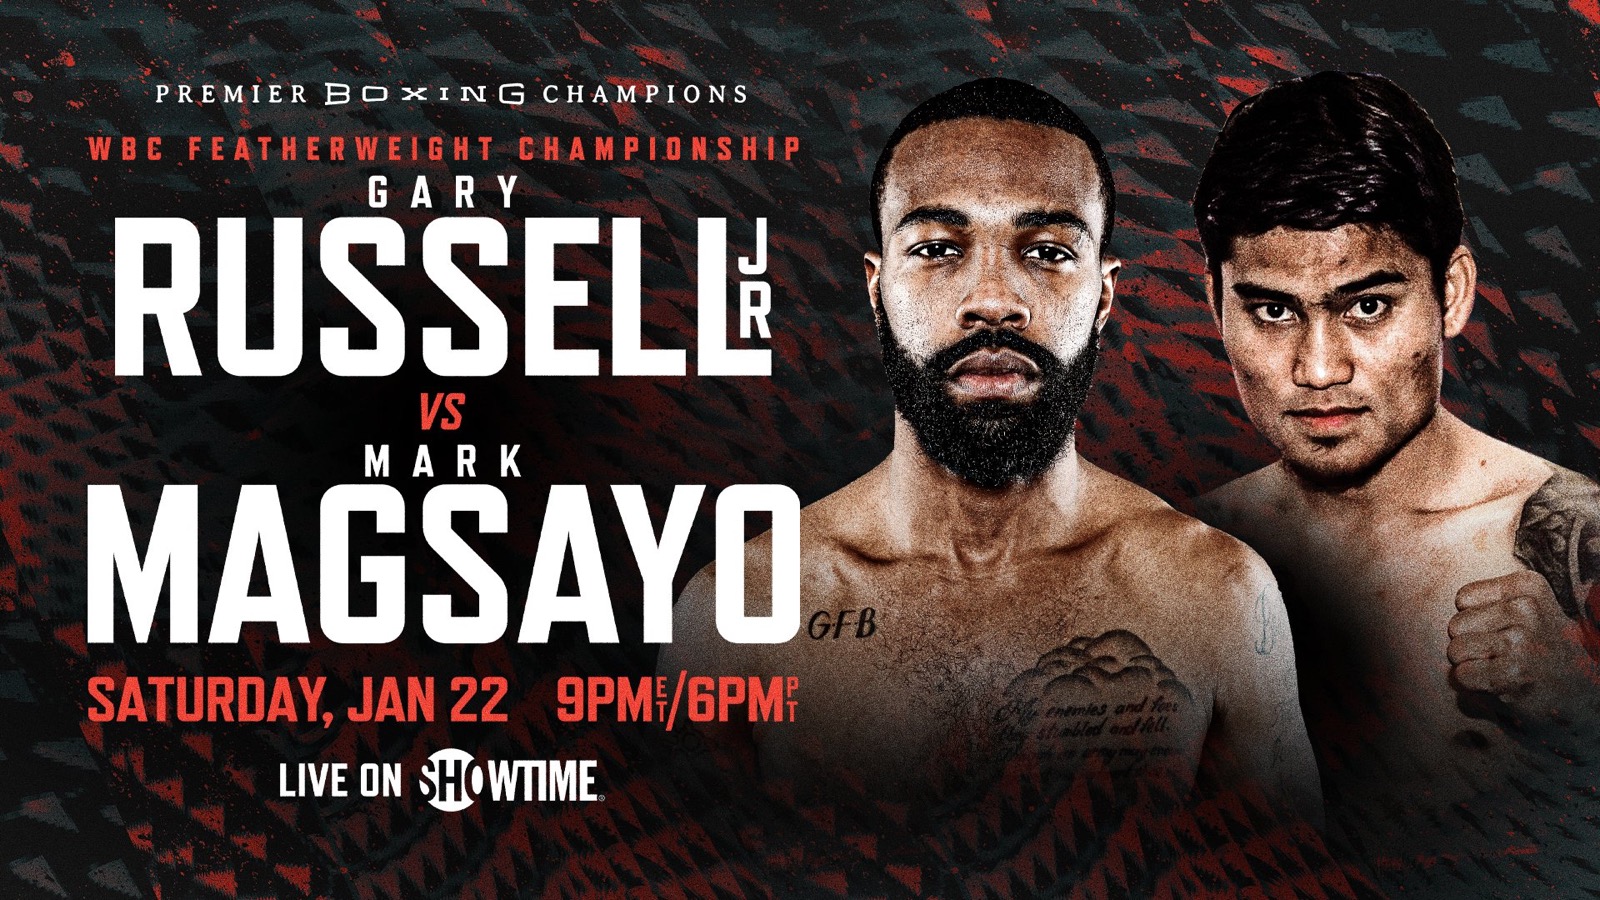 Russell Jr. vs Magsayo - Showtime, FITE - Jan. 22 - 9 pm ET